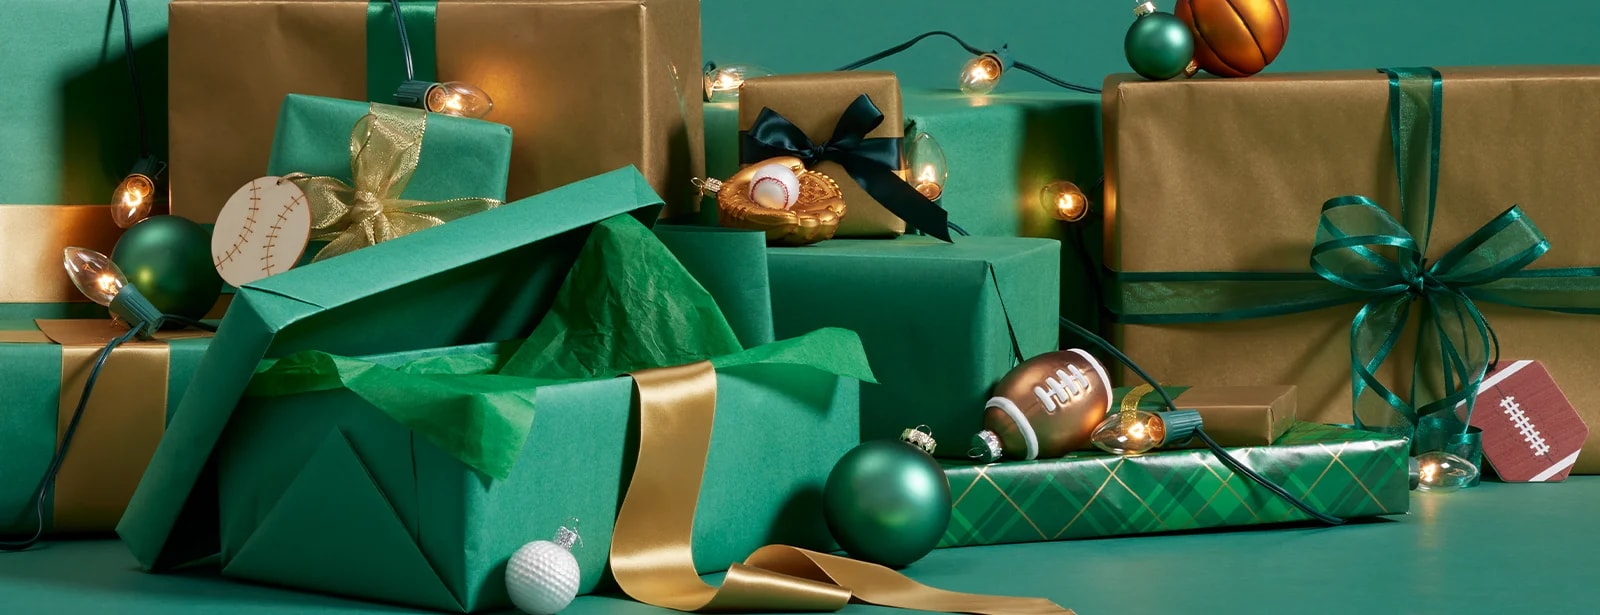 Gift boxes and sport ornaments.